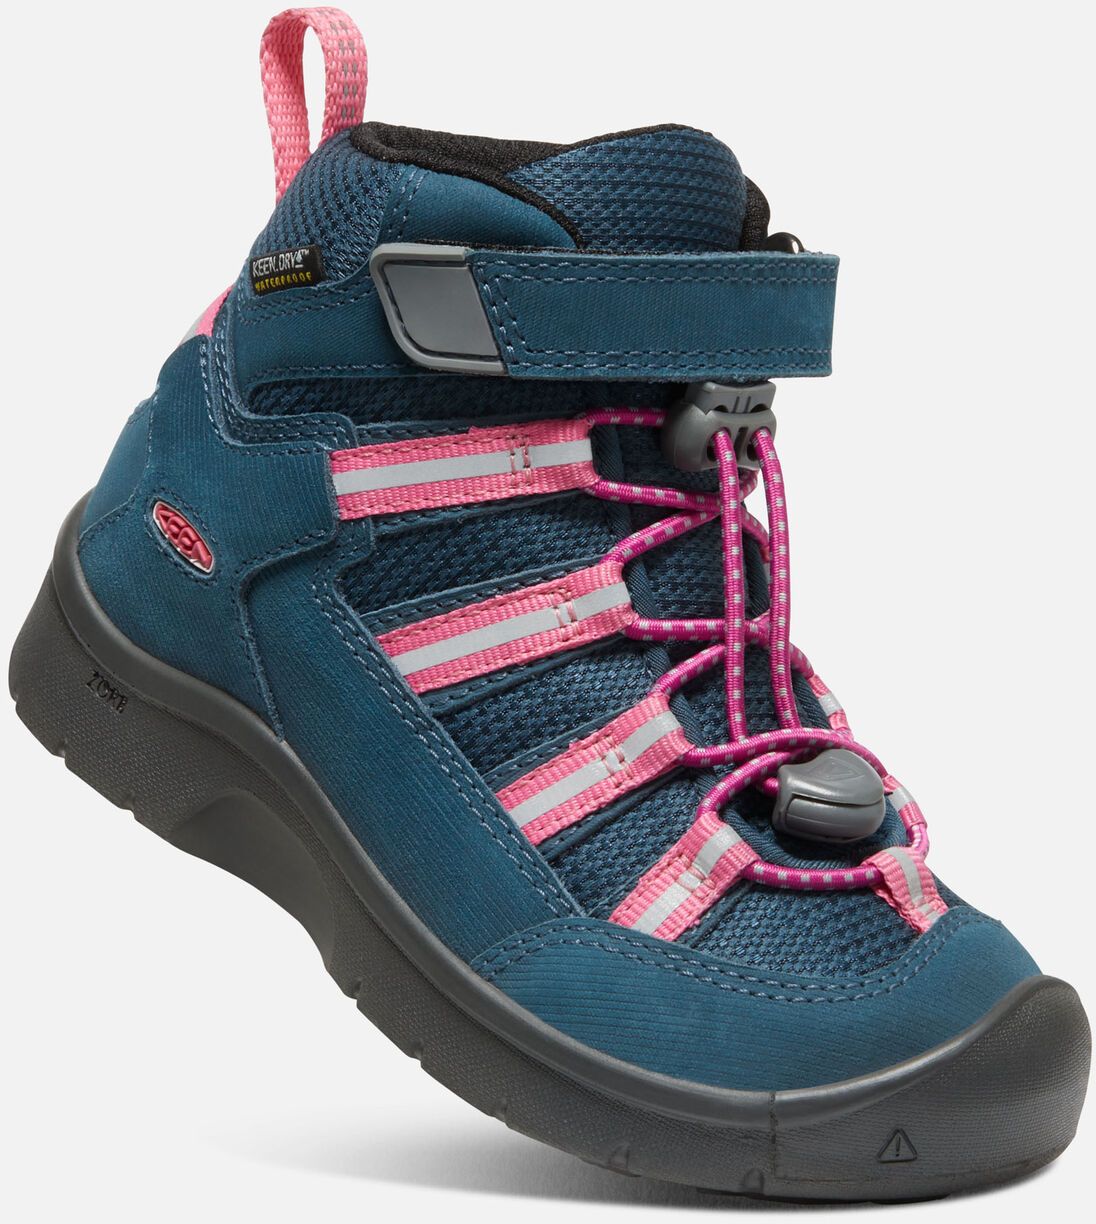 Keen HIKEPORT 2 SPORT MID WP YOUTH blue wing teal/fruit dove Velikost: 39 boty